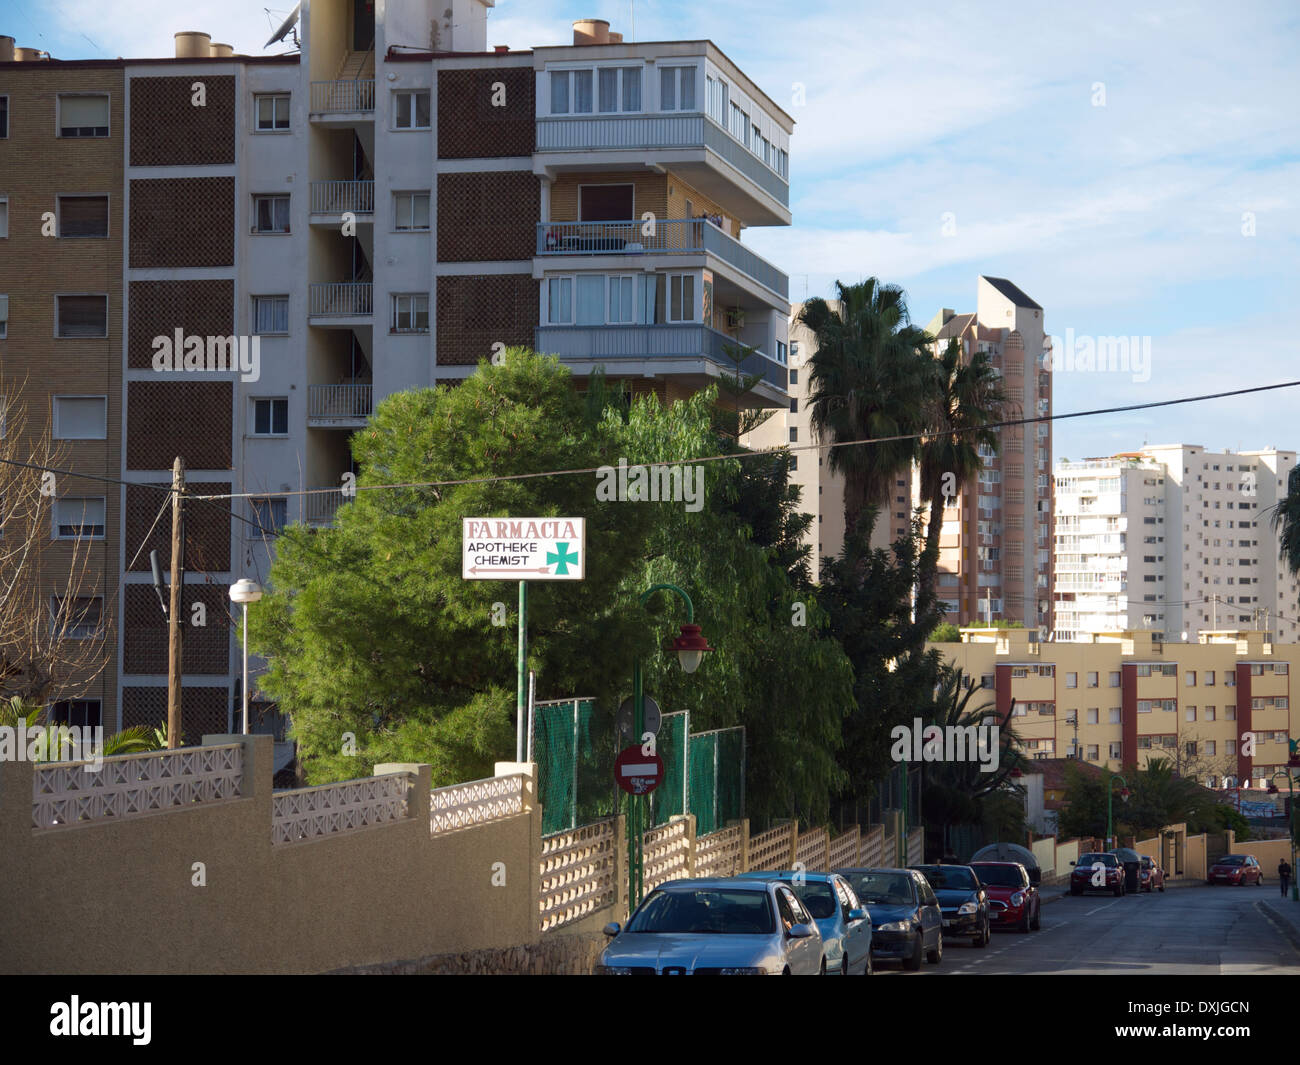 Typical street scene in Benidorm, Spain showing a pharmacy sign. Stock Photo